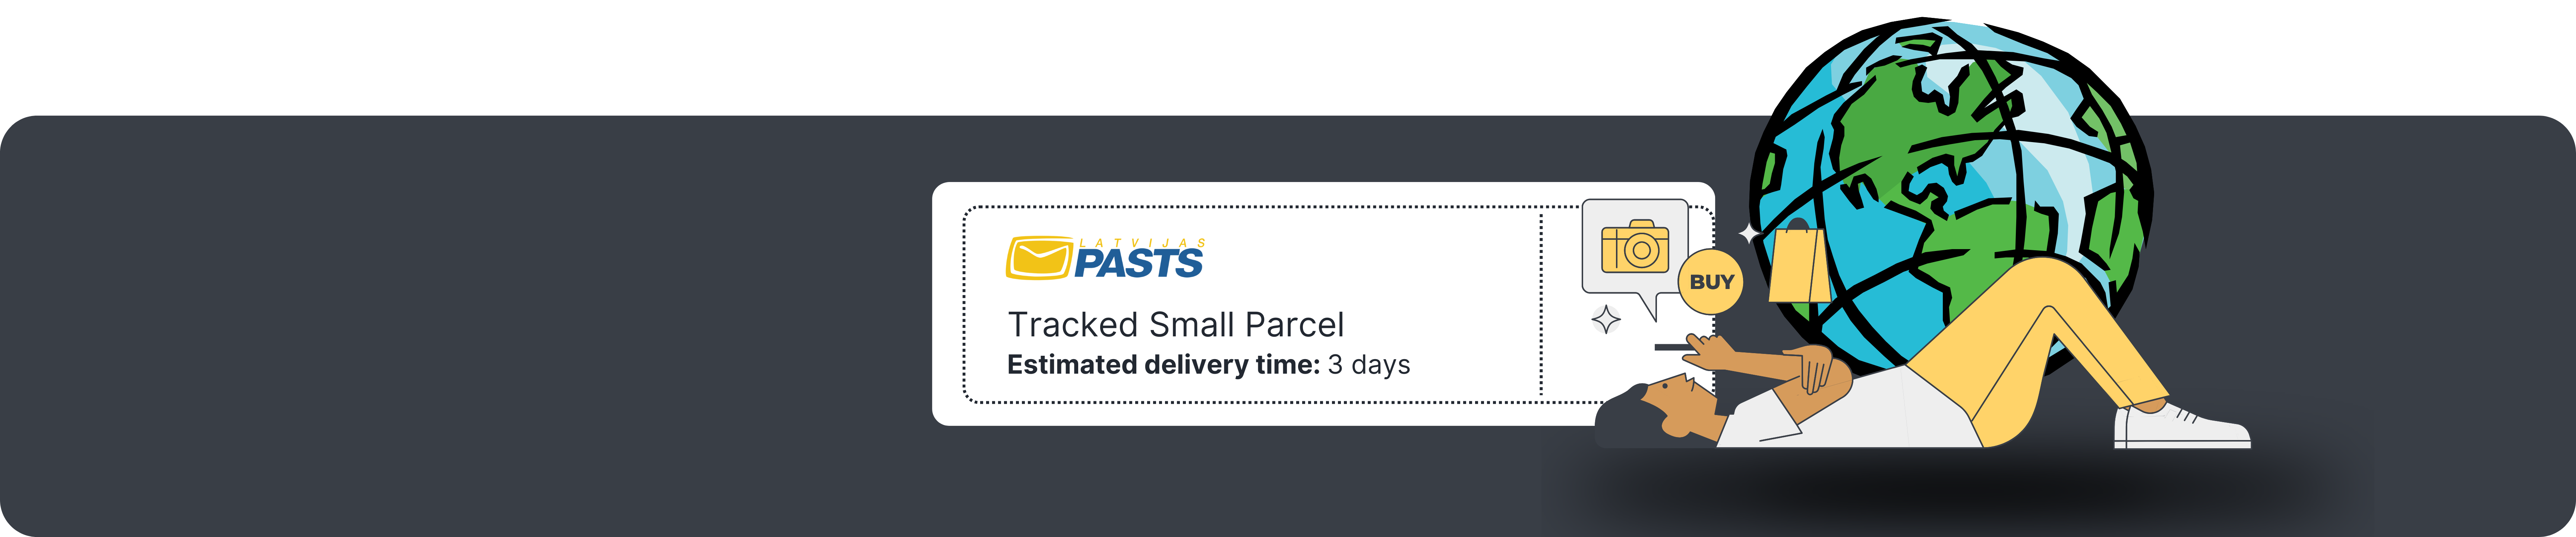 Tracked small parcel